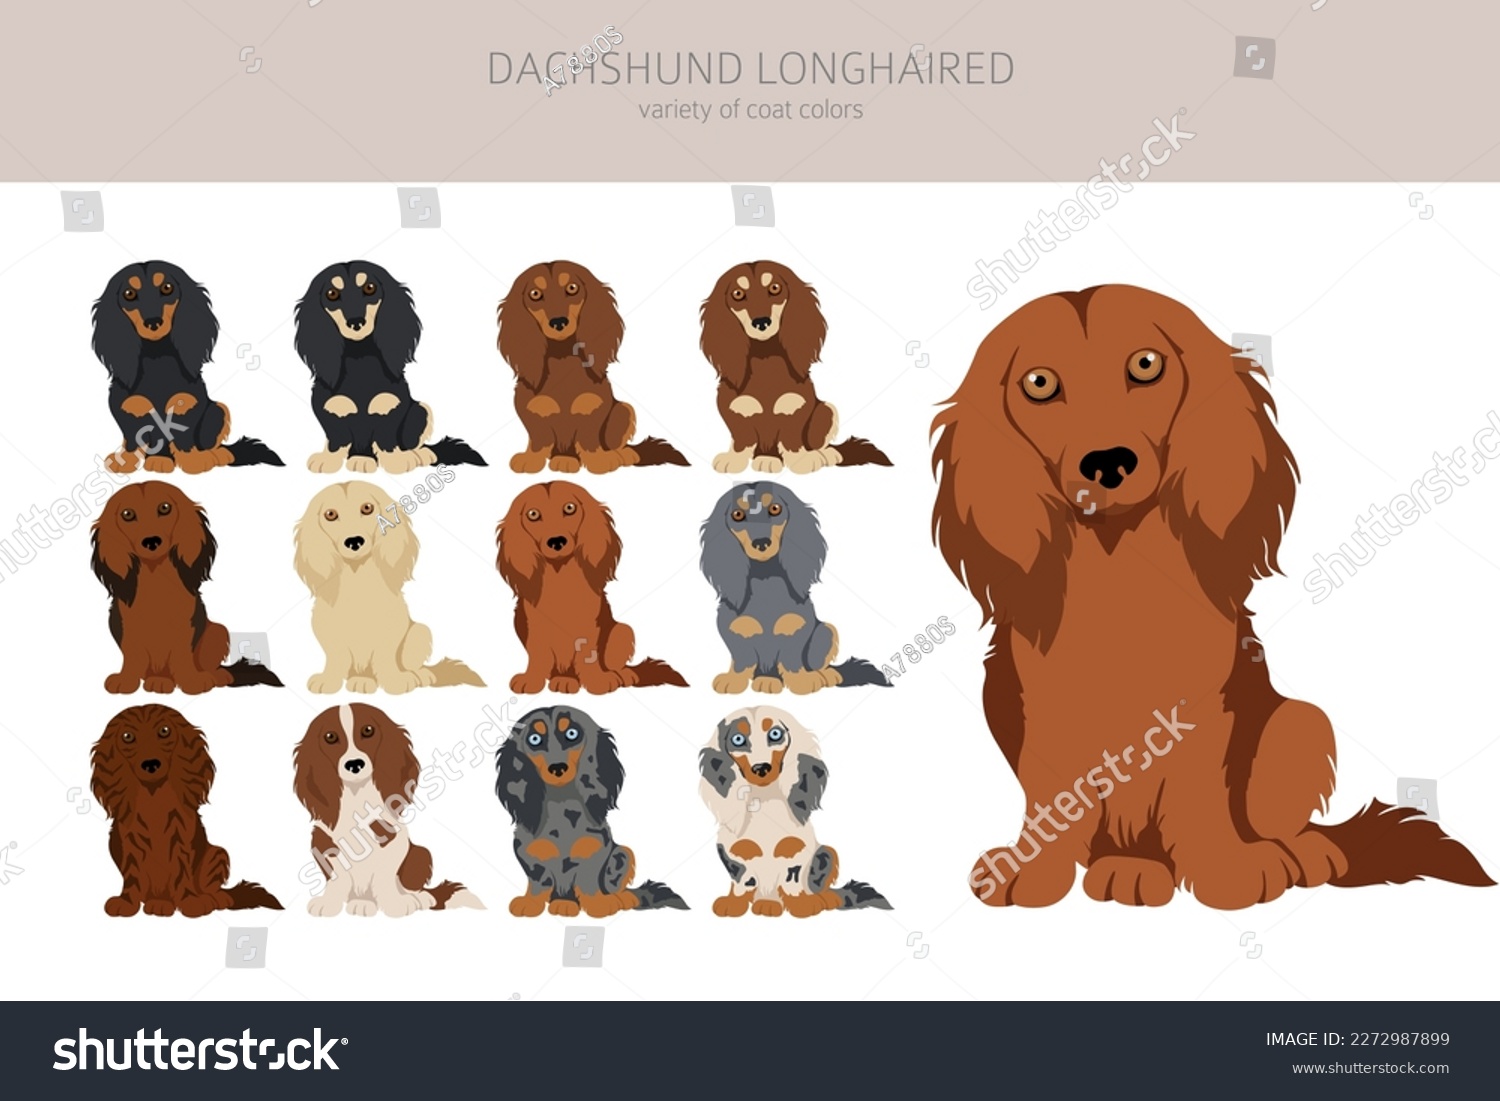 SVG of Dachshund long haired clipart. Different poses, coat colors set.  Vector illustration svg